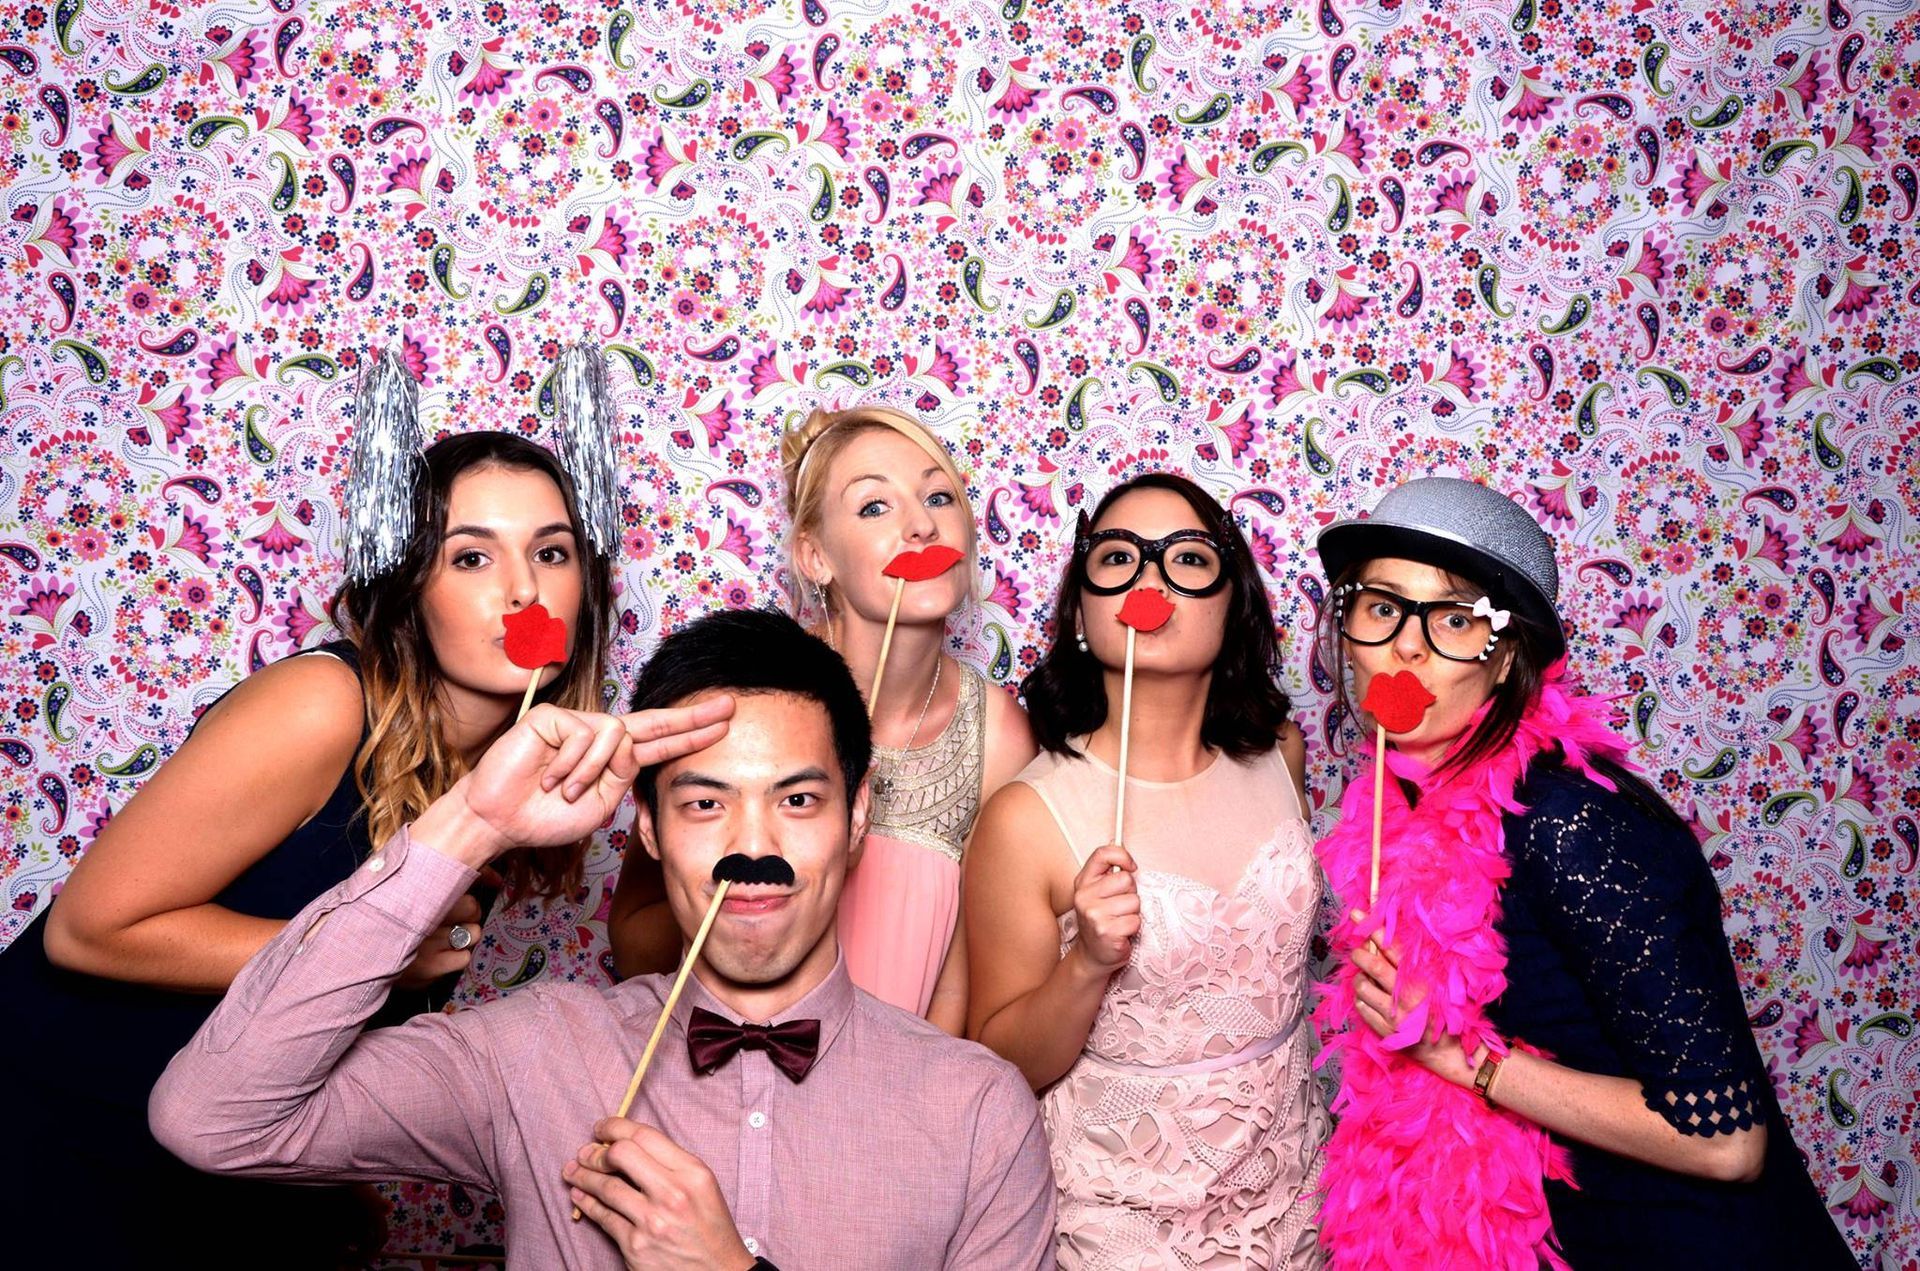 Friends creating picture-perfect memories at a lively DMV bachelorette party with Flash Party Photo Booth!